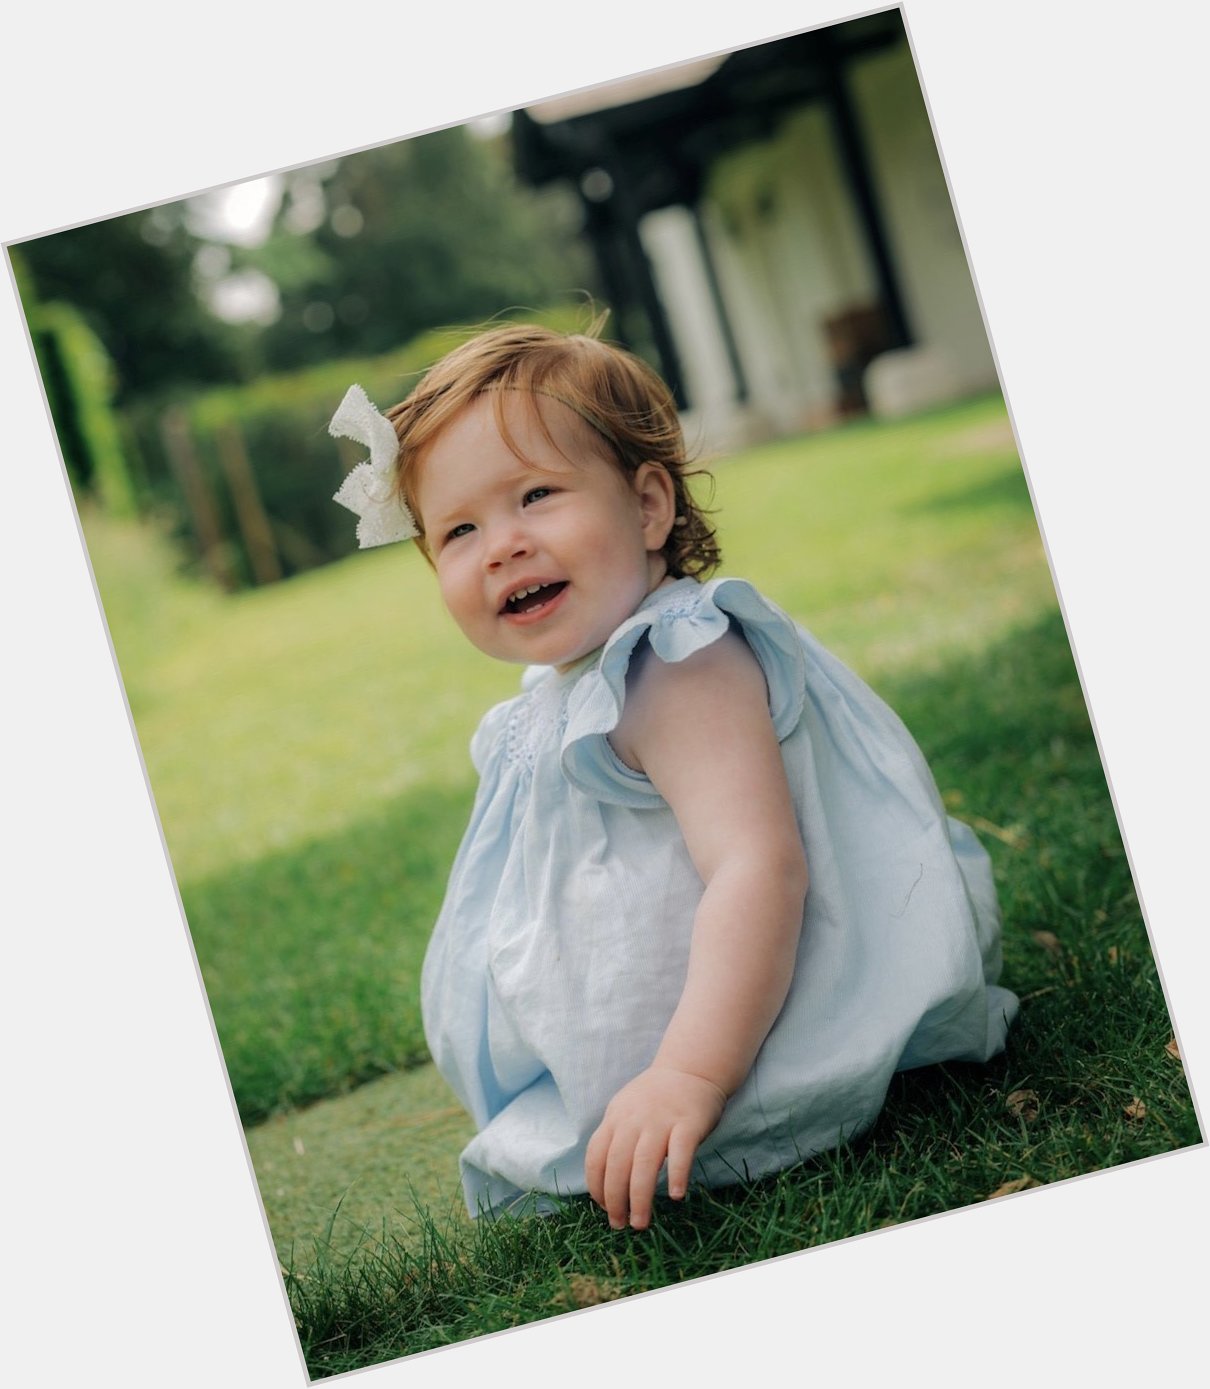  Happy 1st Birthday Lilibet Windsor! Your parents Prince Harry and Duchess Meghan celebrate you! 